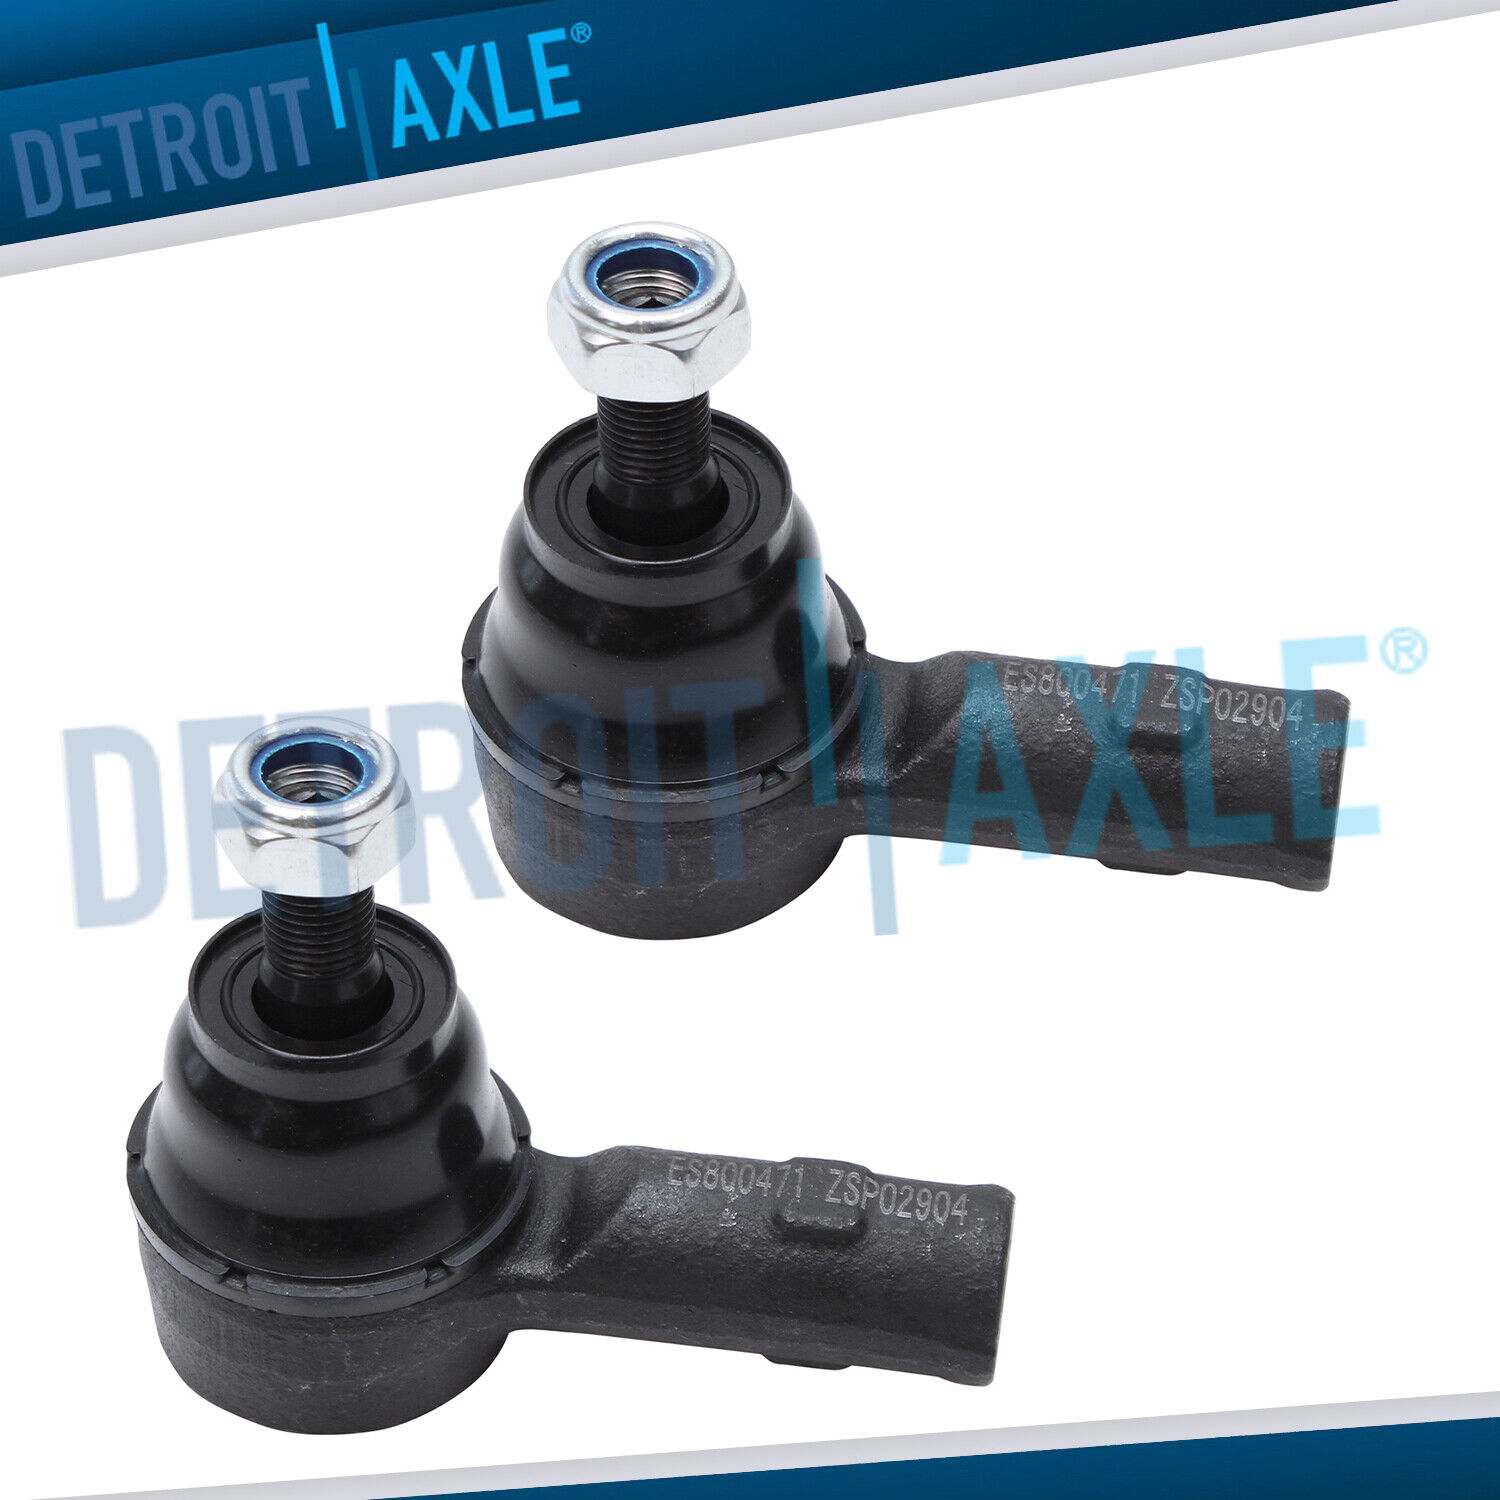 Brand New Pair Both (2) Outer Tie Rod Ends for Mitsubishi Lancer and Outlander